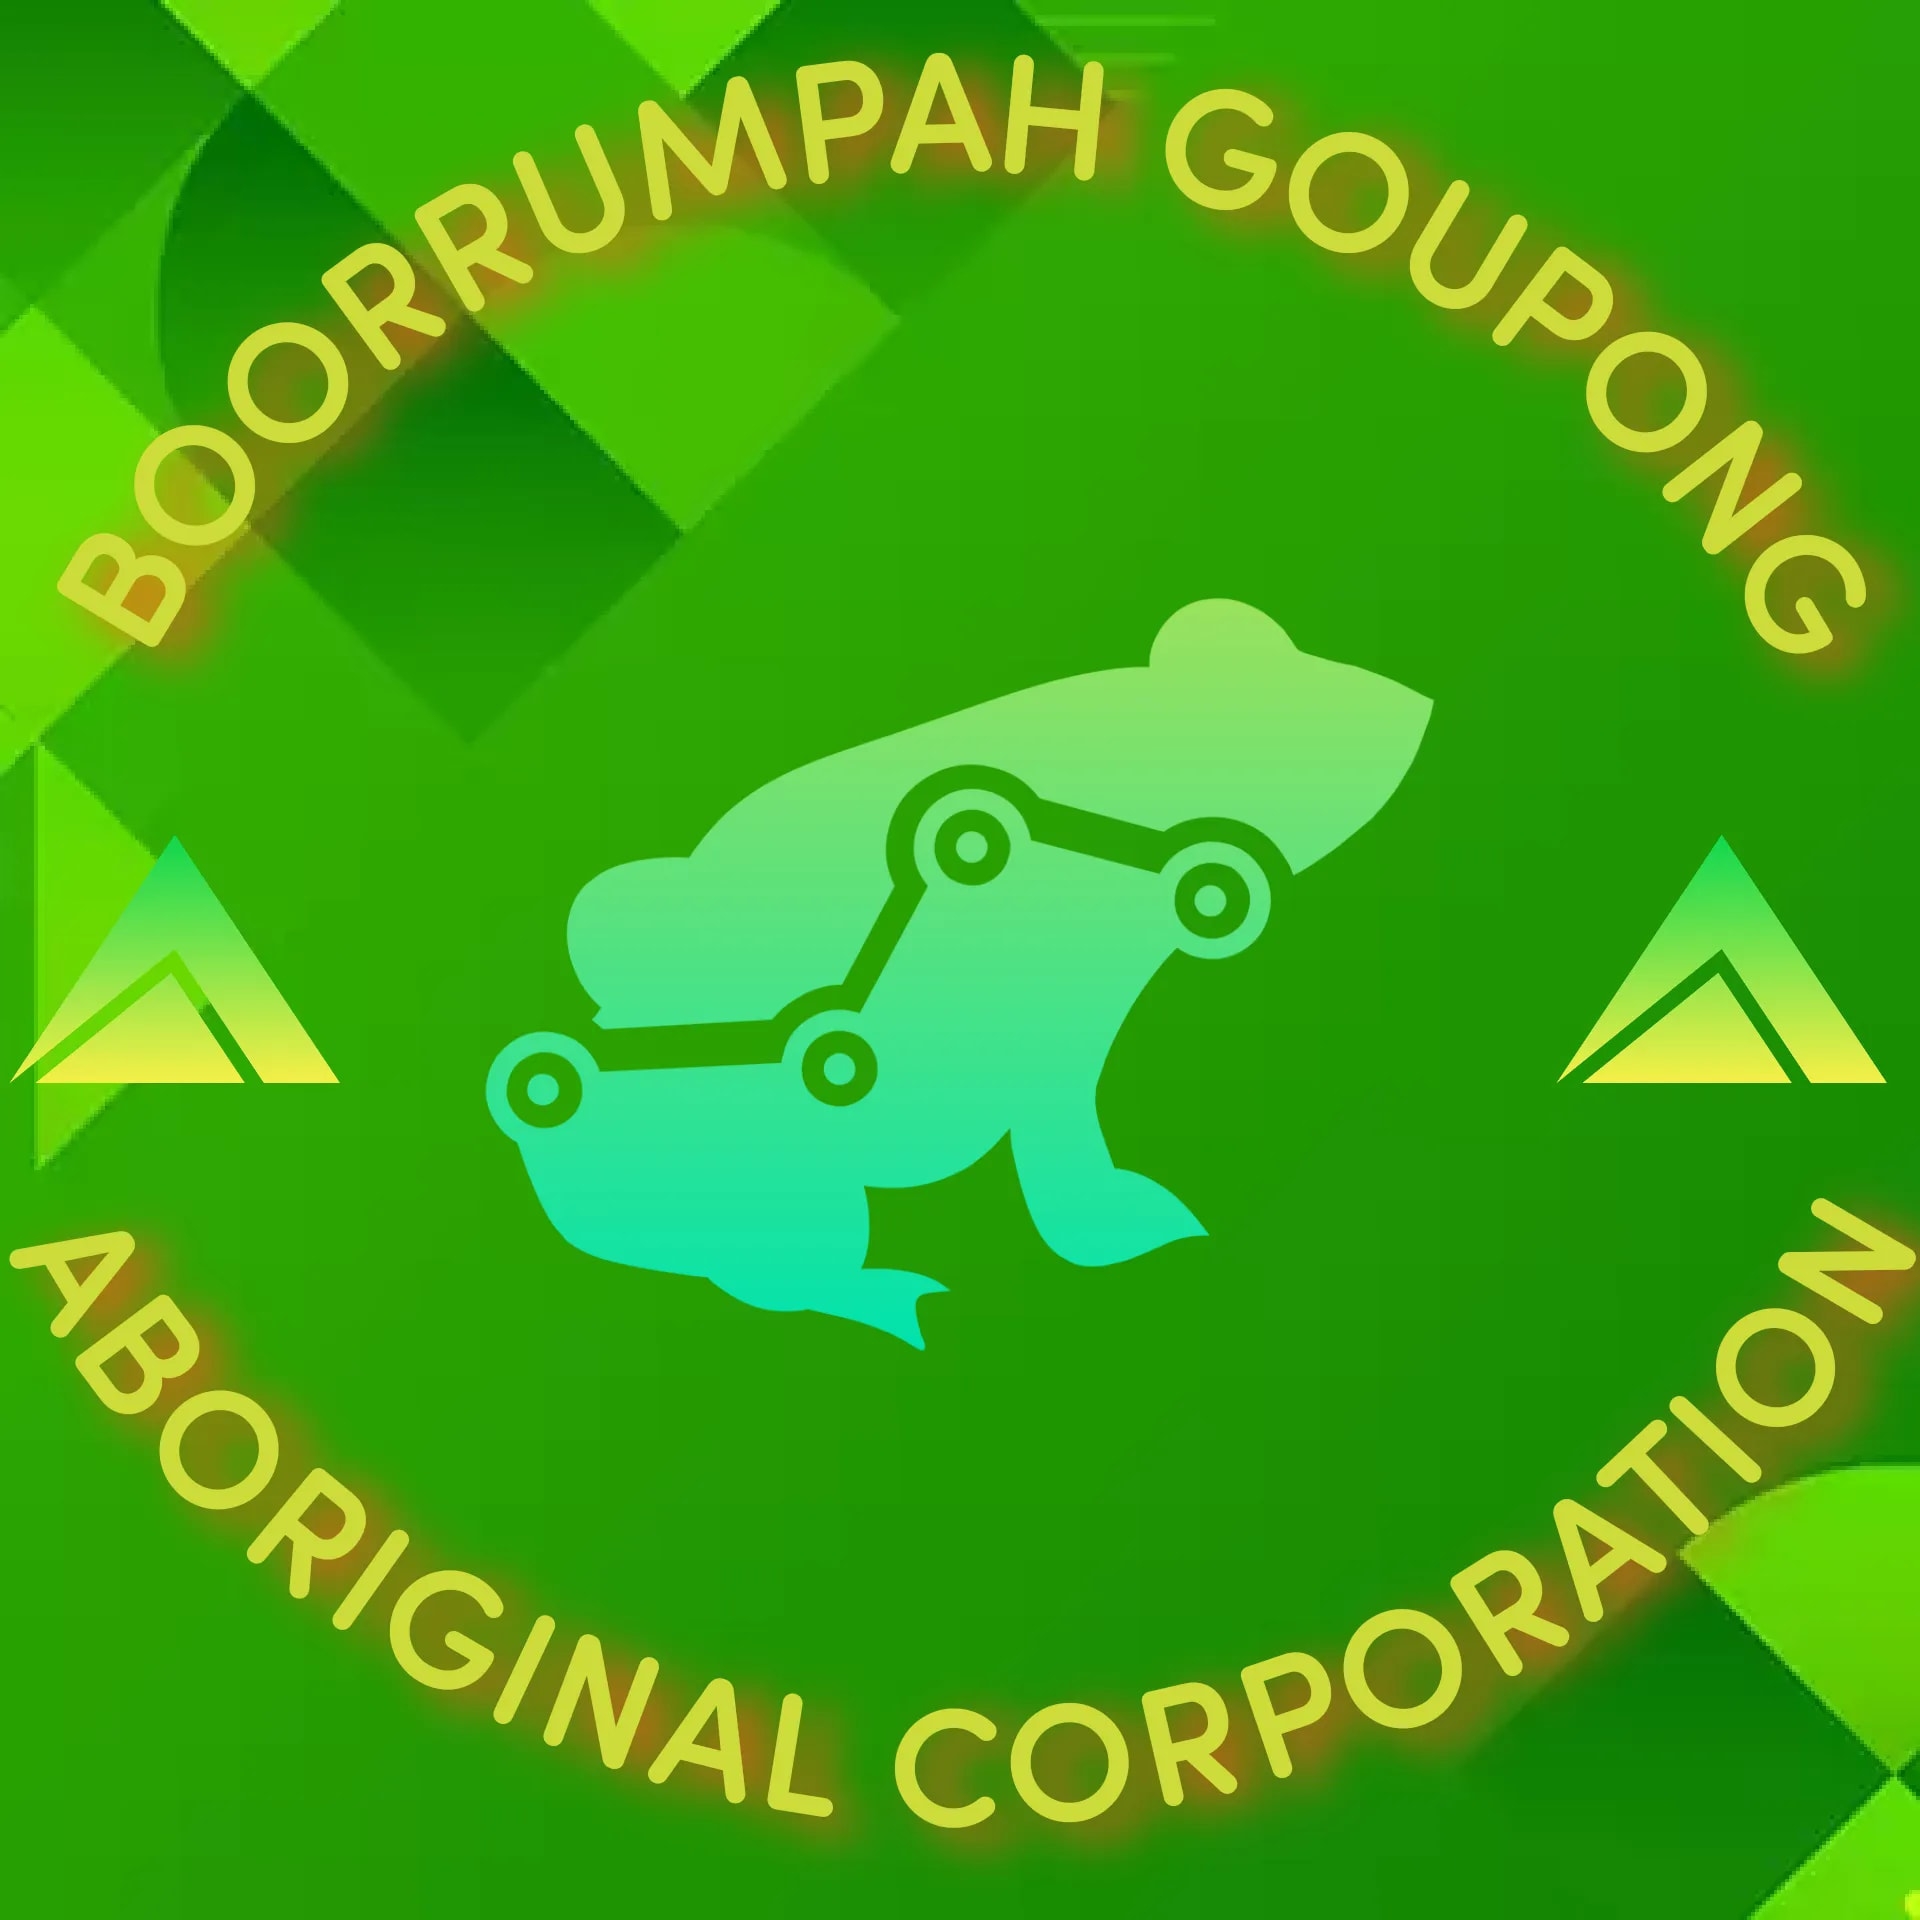 Green square with a frog surrounded by words Boorrumpah Goupong Aboriginal Corporation